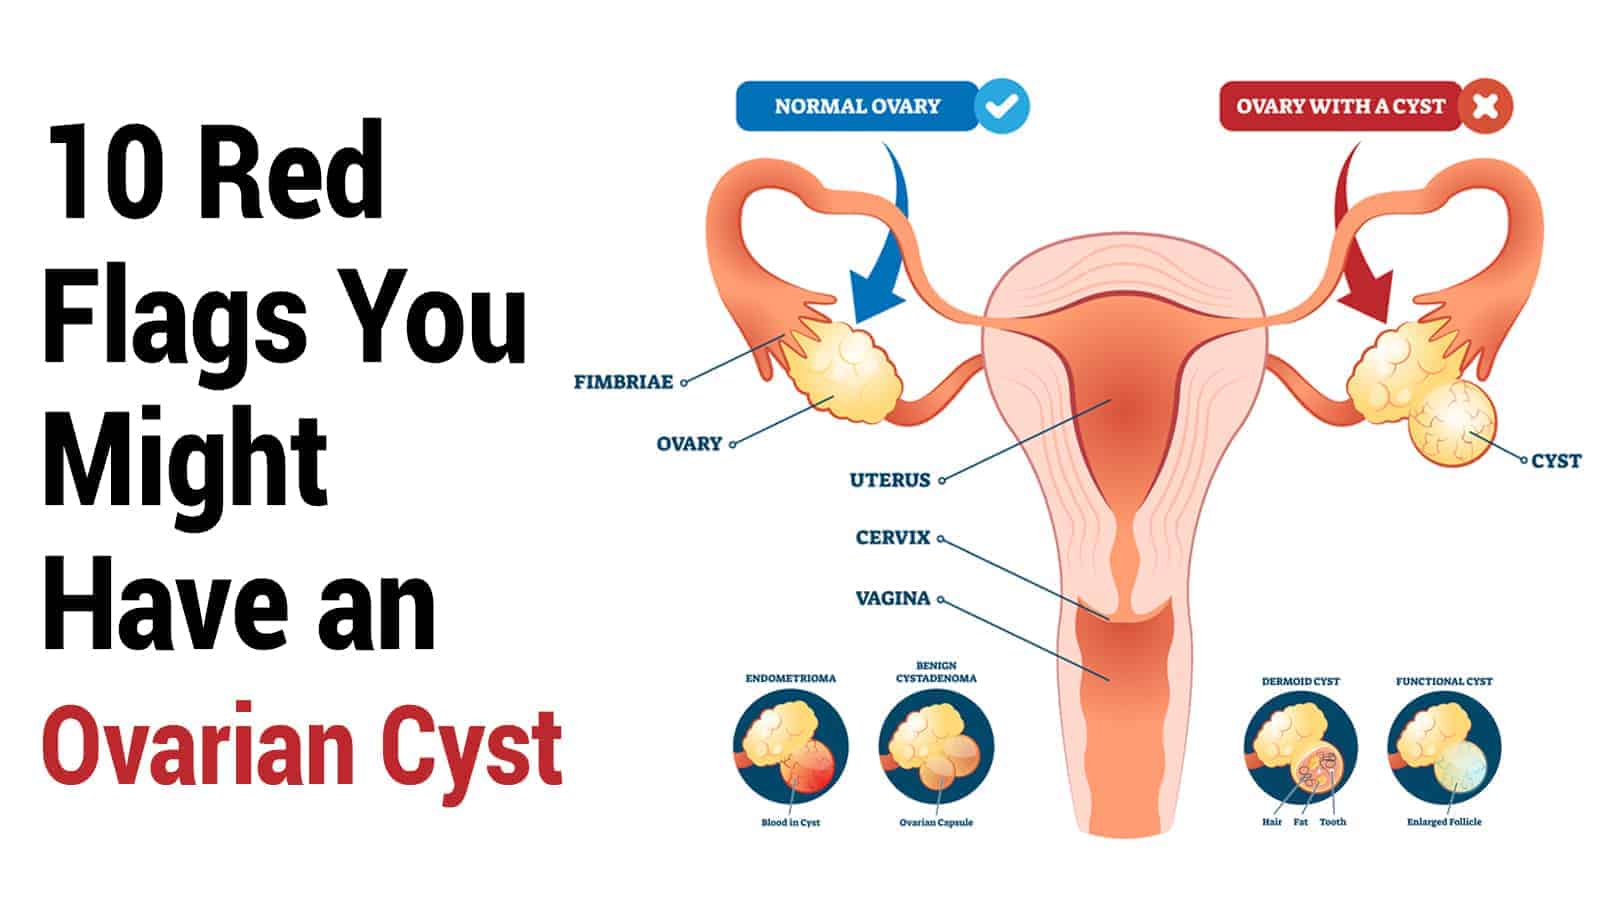 10 Red Flags You Might Have an Ovarian Cyst